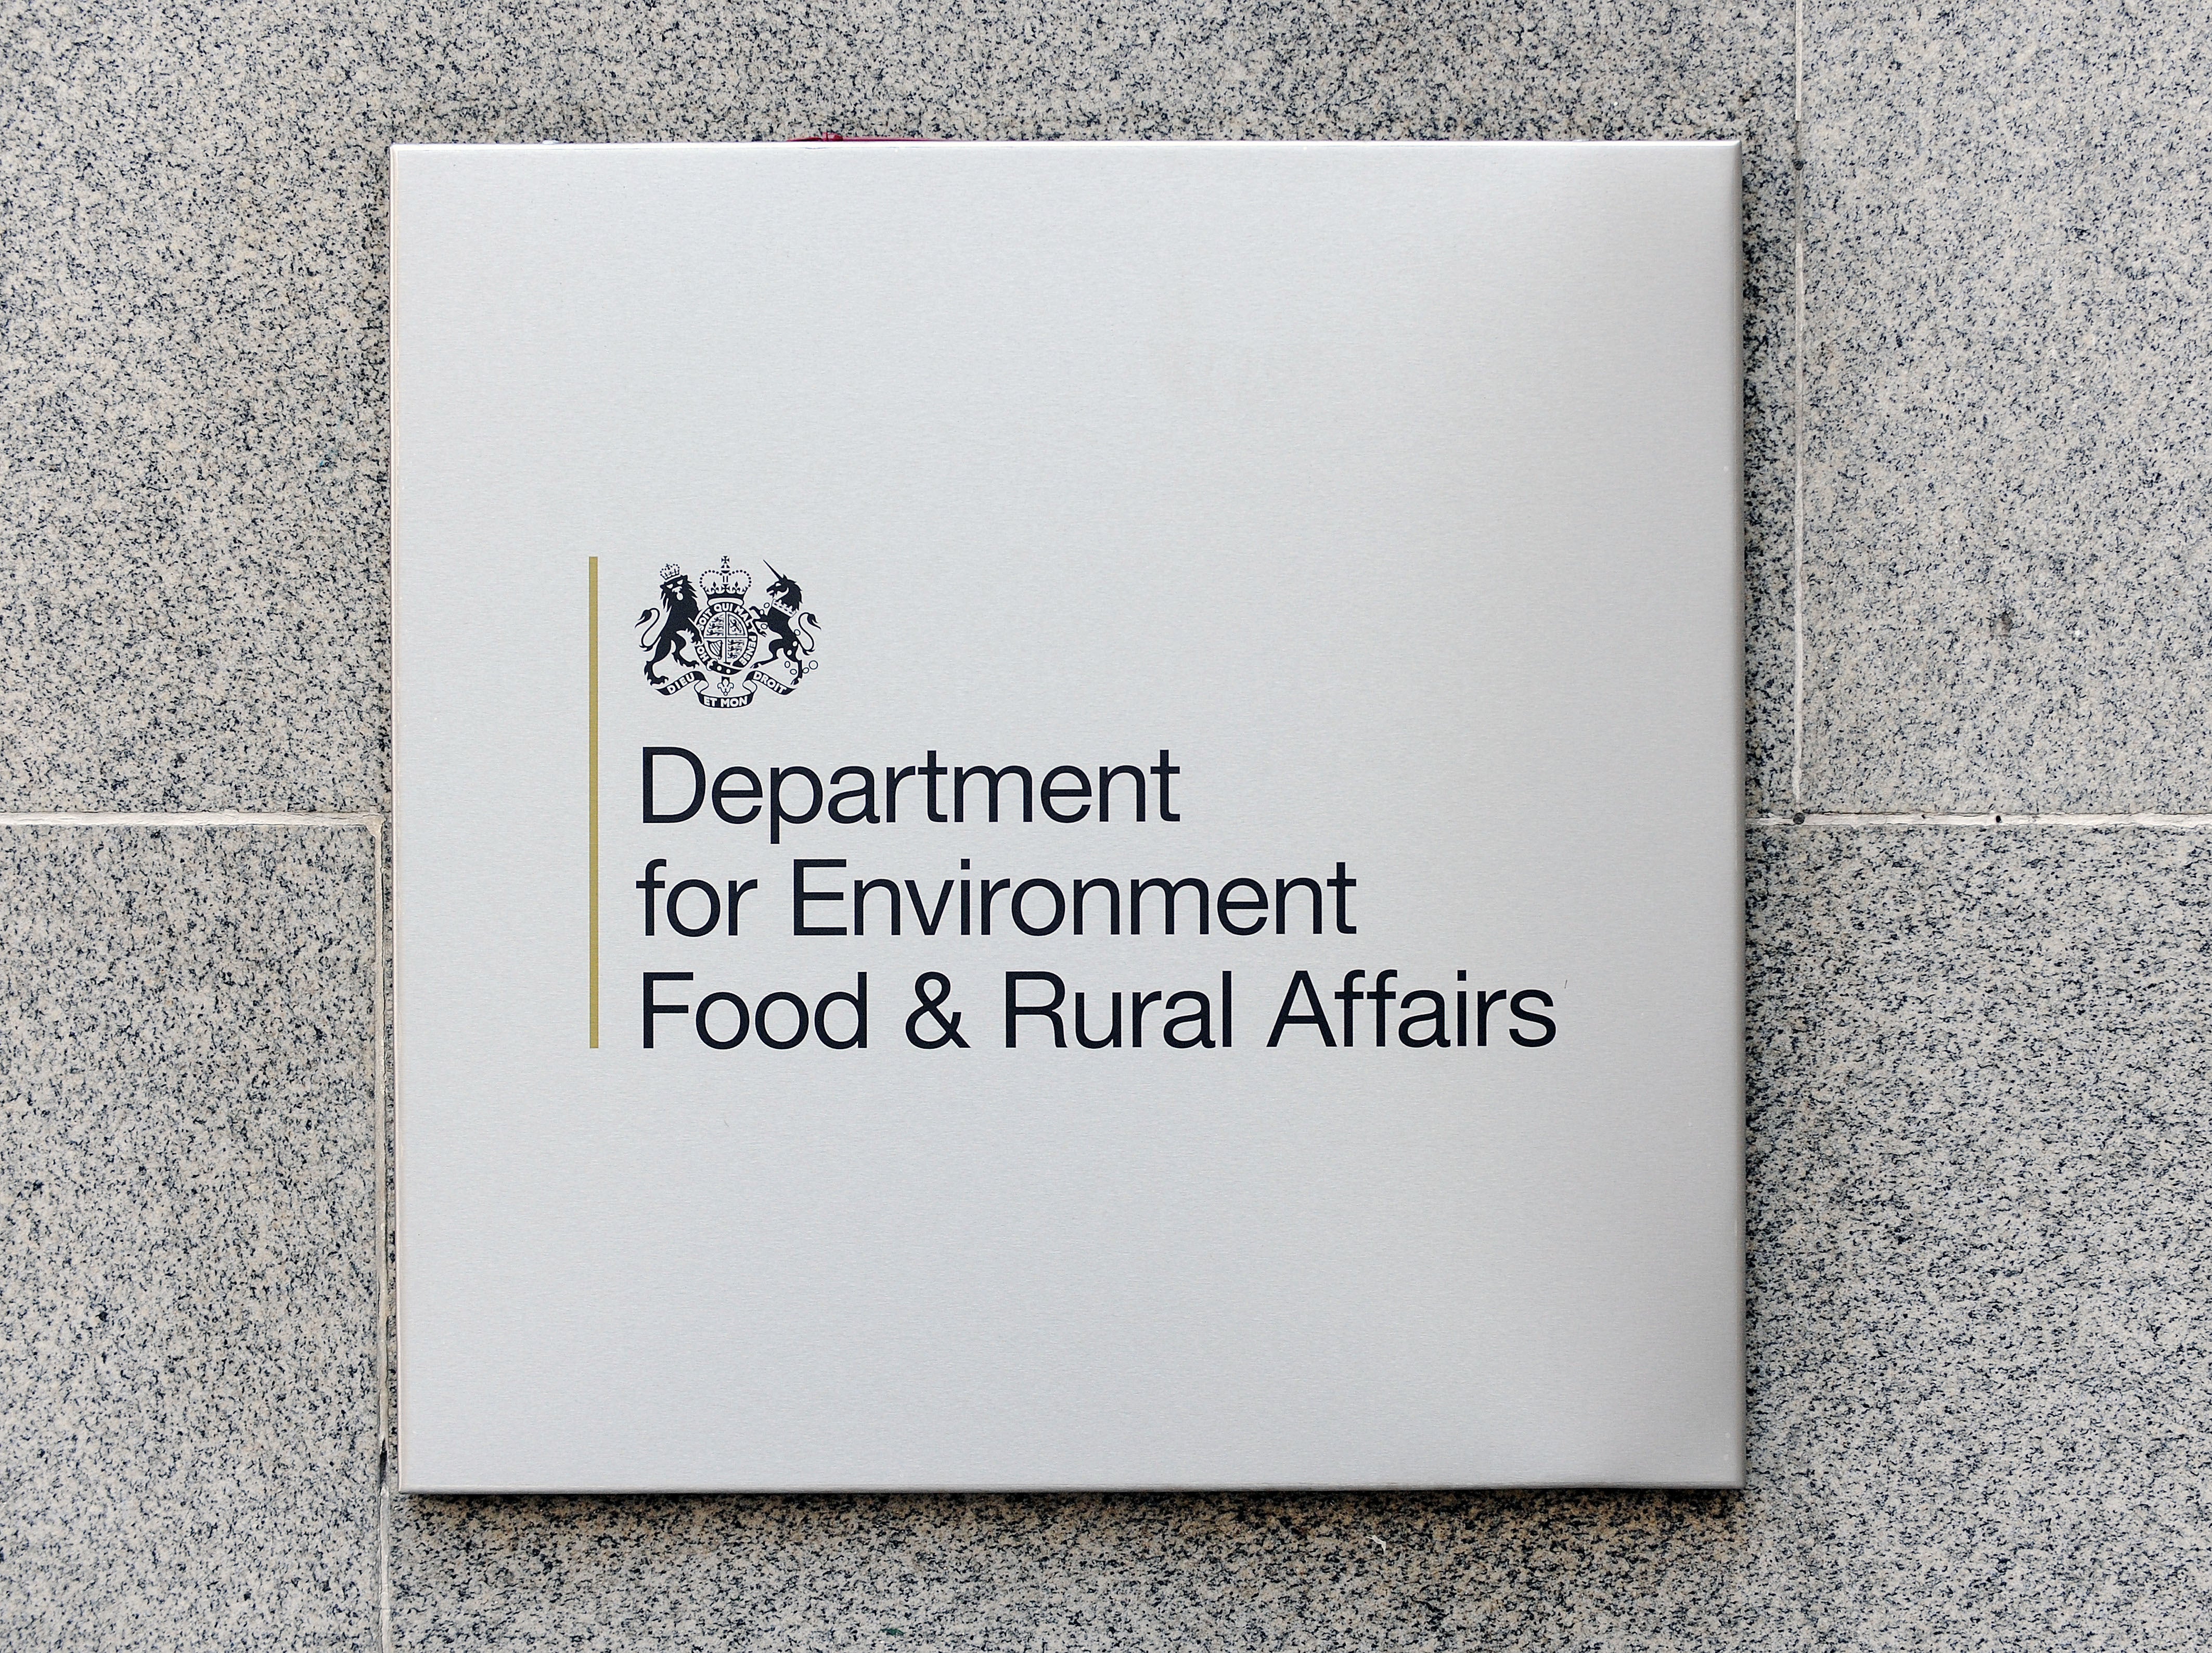 The sign at Defra headquarters in Smith Square, central London. PRESS ASSOCIATION Photo. Picture date: Monday February 18, 2013. Photo credit should read: Nick Ansell/PA Wire